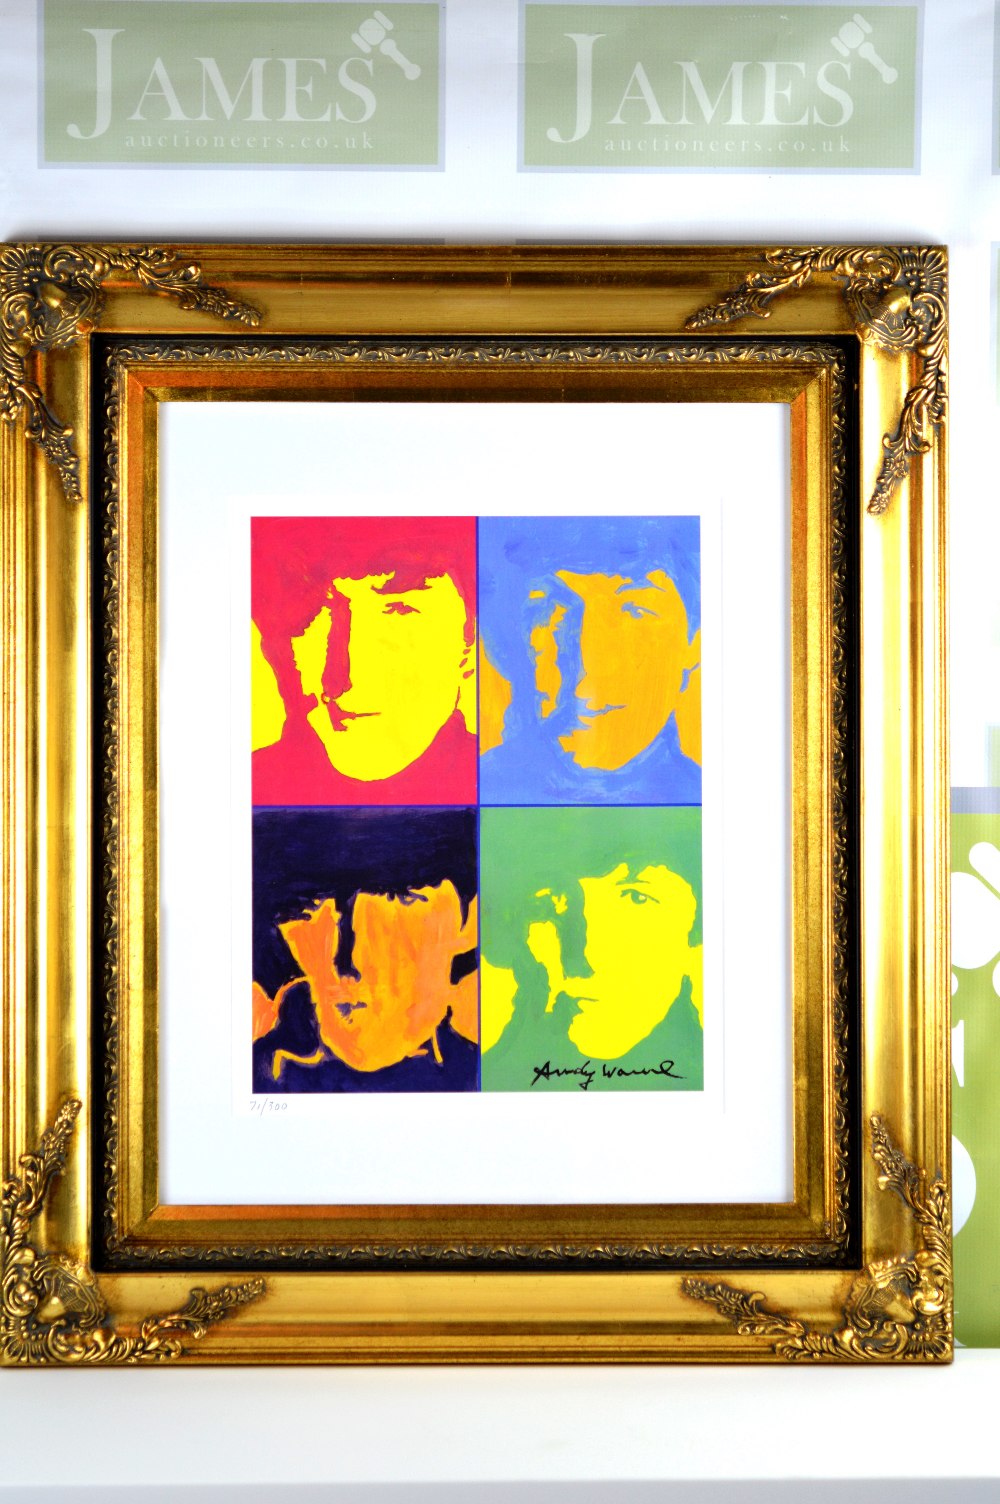 Andy Warhol Signed & Hand Numberd Limited Edition The Beatles Lithograph, Ornate framed,stunning